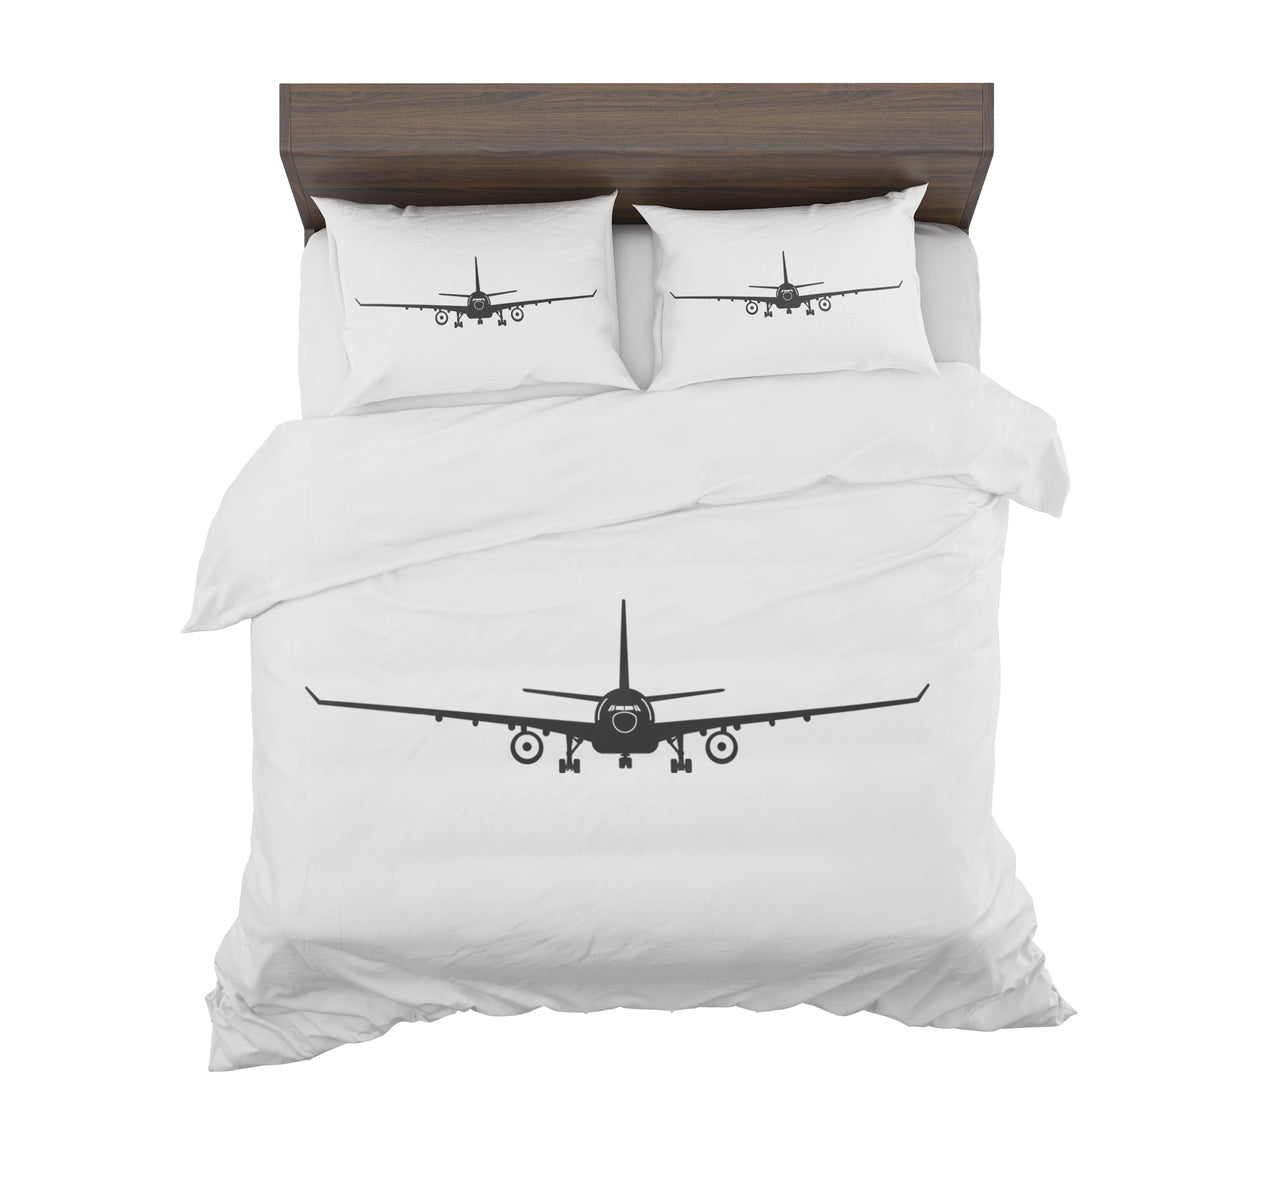 Airbus A330 Silhouette Designed Bedding Sets